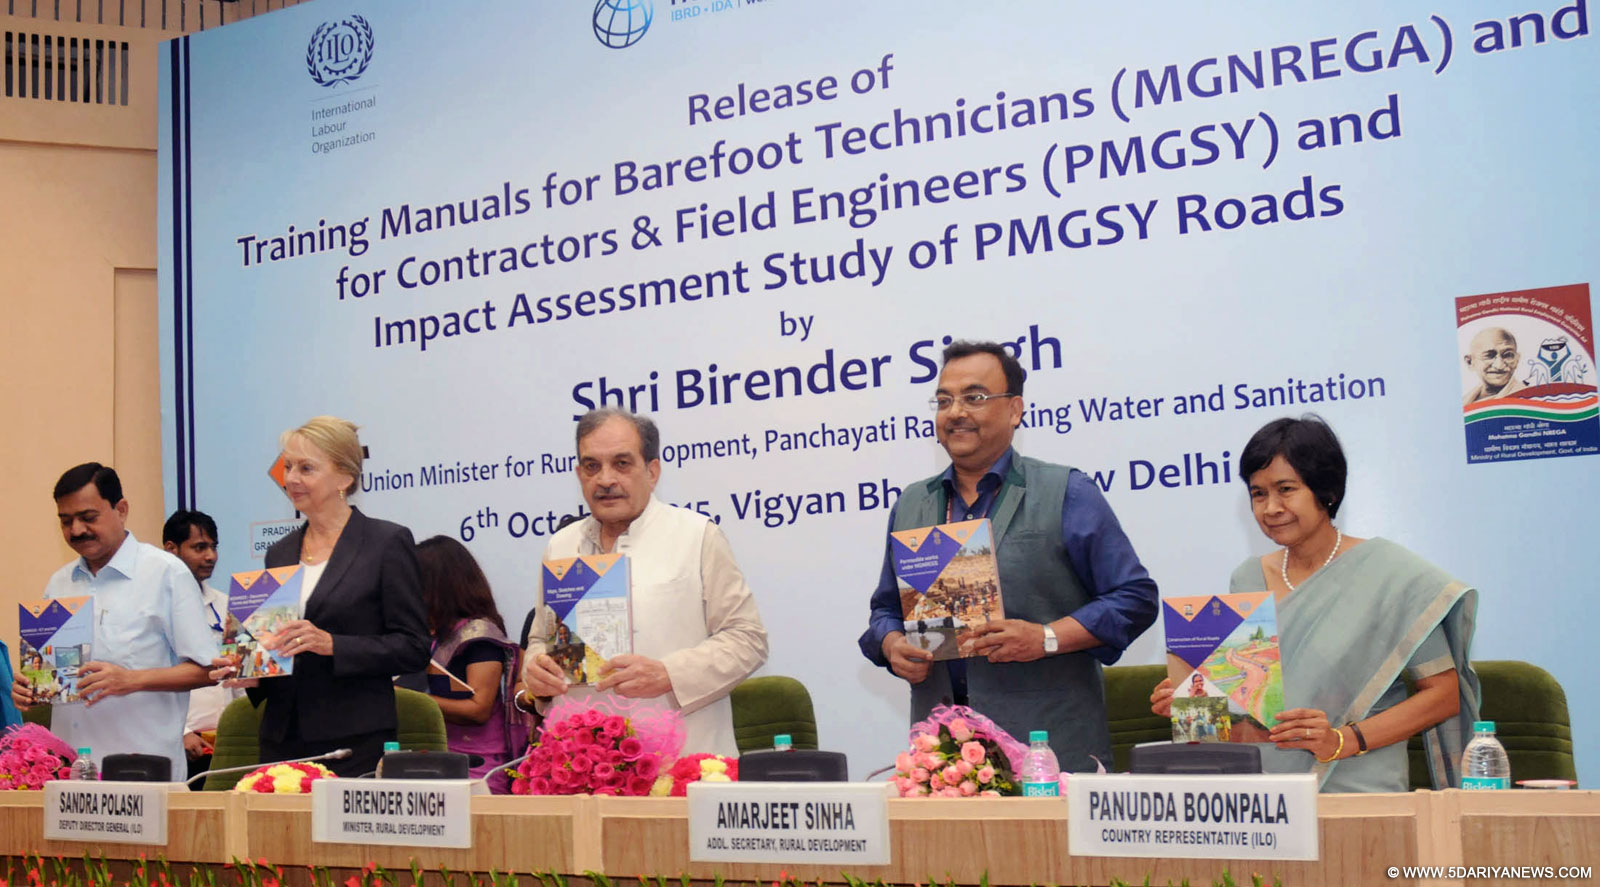 The Union Minister for Rural Development, Panchayati Raj, Drinking Water and Sanitation, Shri Chaudhary Birender Singh releasing the Training Manuals for MGNREGA and Impact Assessment Study of PMGSY Roads, in New Delhi on October 06, 2015.